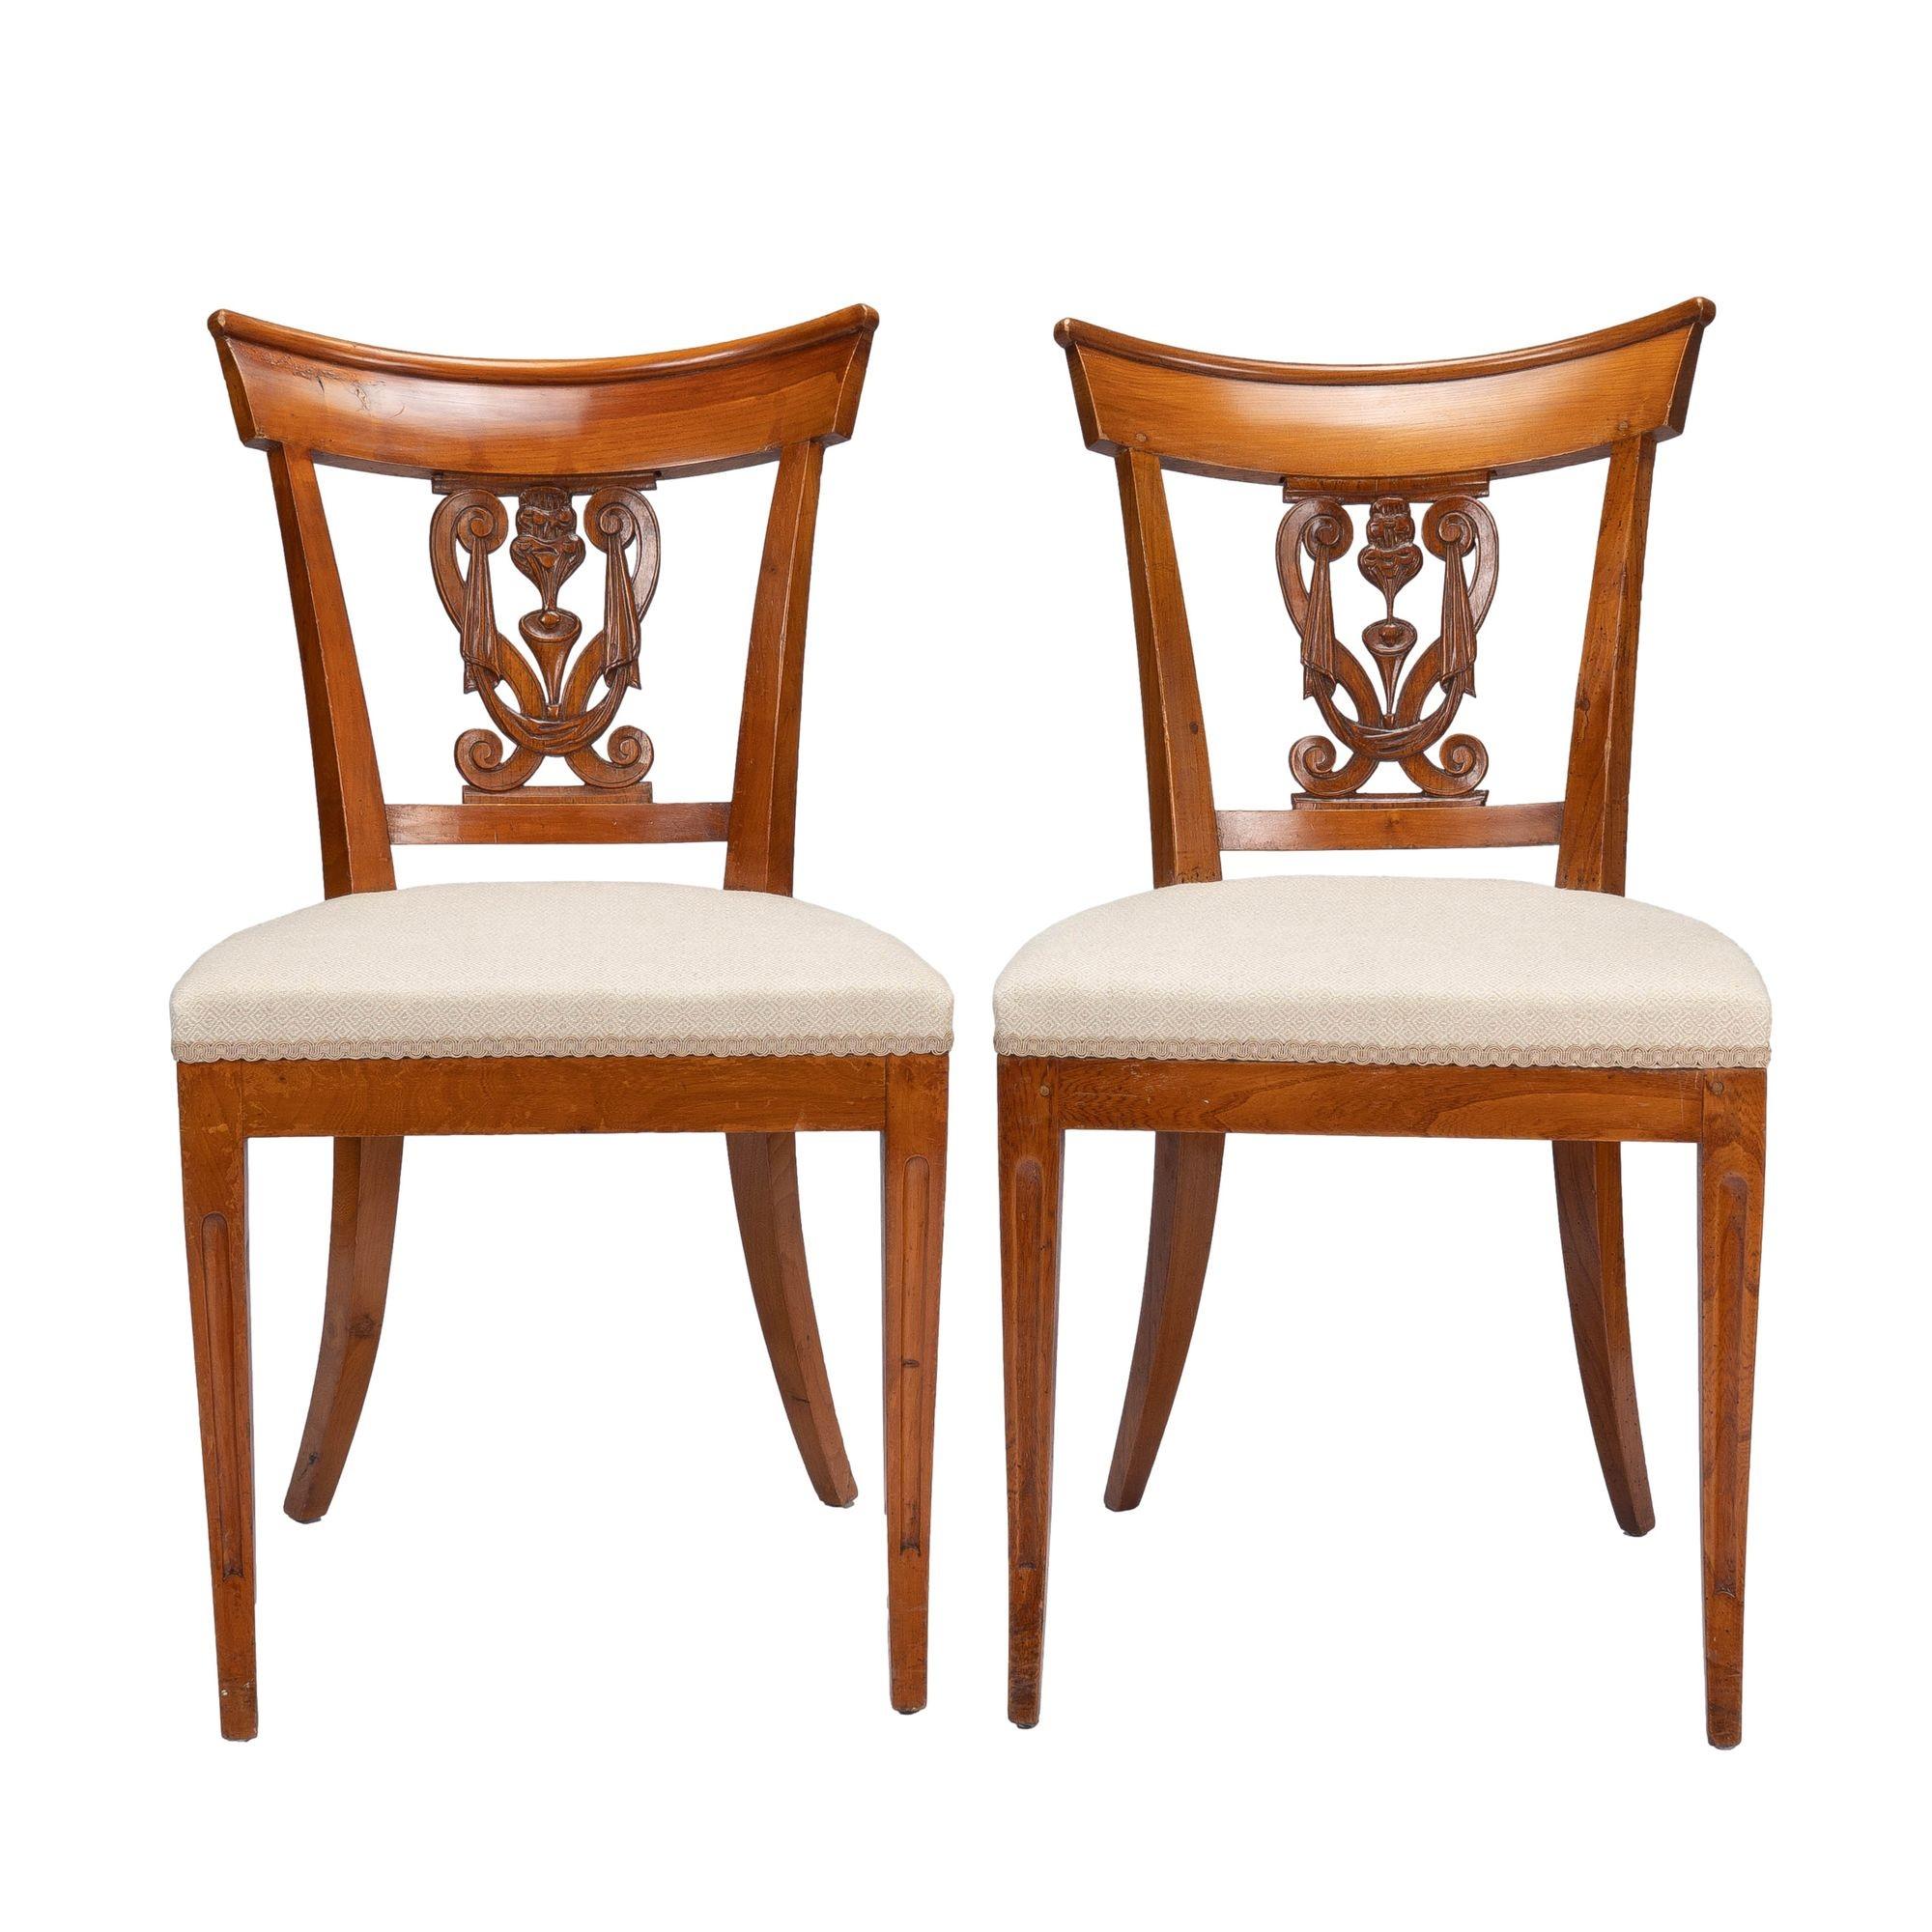 Pair of French neoclassic upholstered seat side chairs. The chairs are defined by sabre front and raked rear legs which support an upholstered boxed seat. The splayed upper leg posts are joined by a lower back rail and dramatically carved cut crest